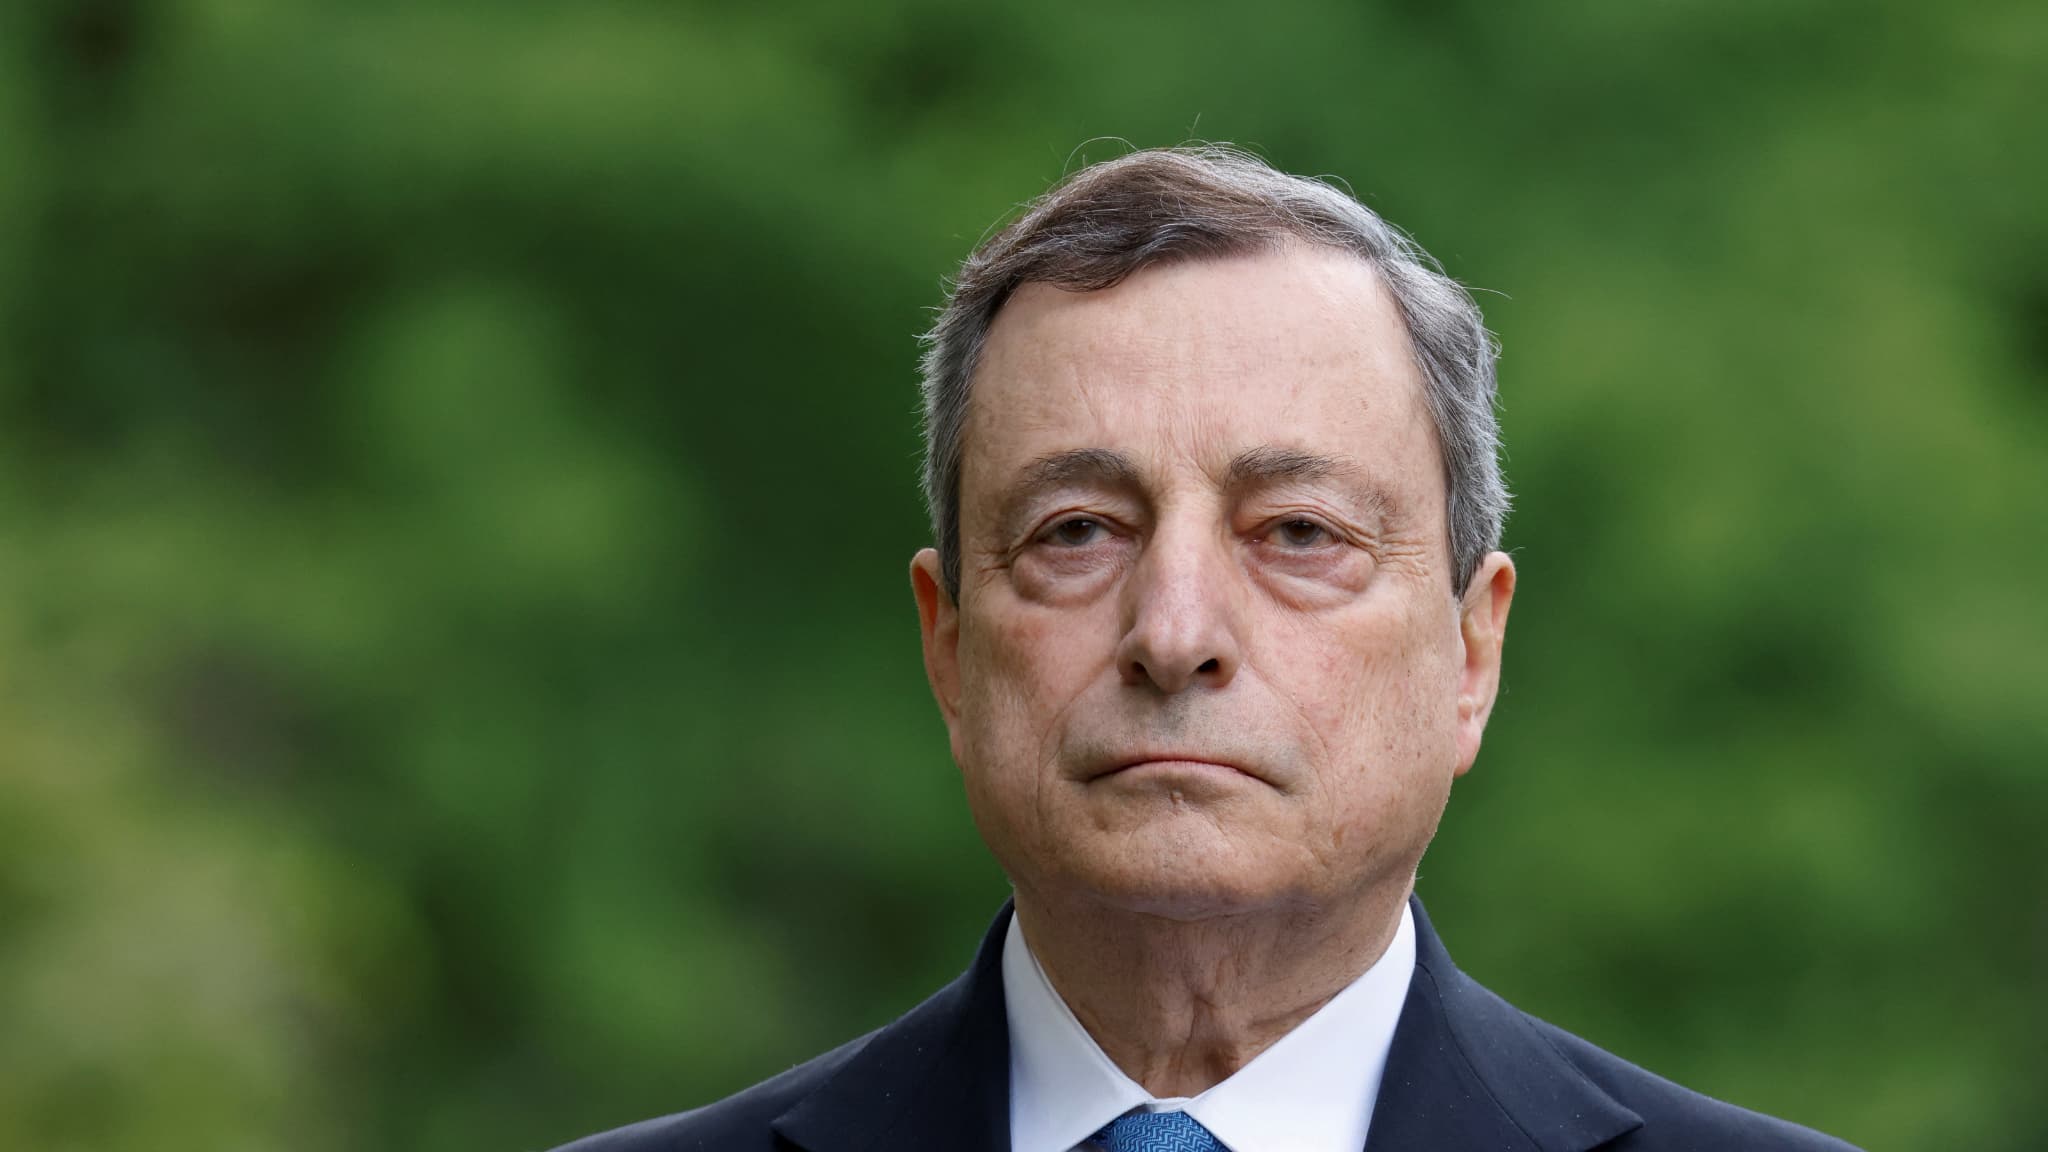 Italy: more than 1000 mayors ask Mario Draghi to continue as prime minister